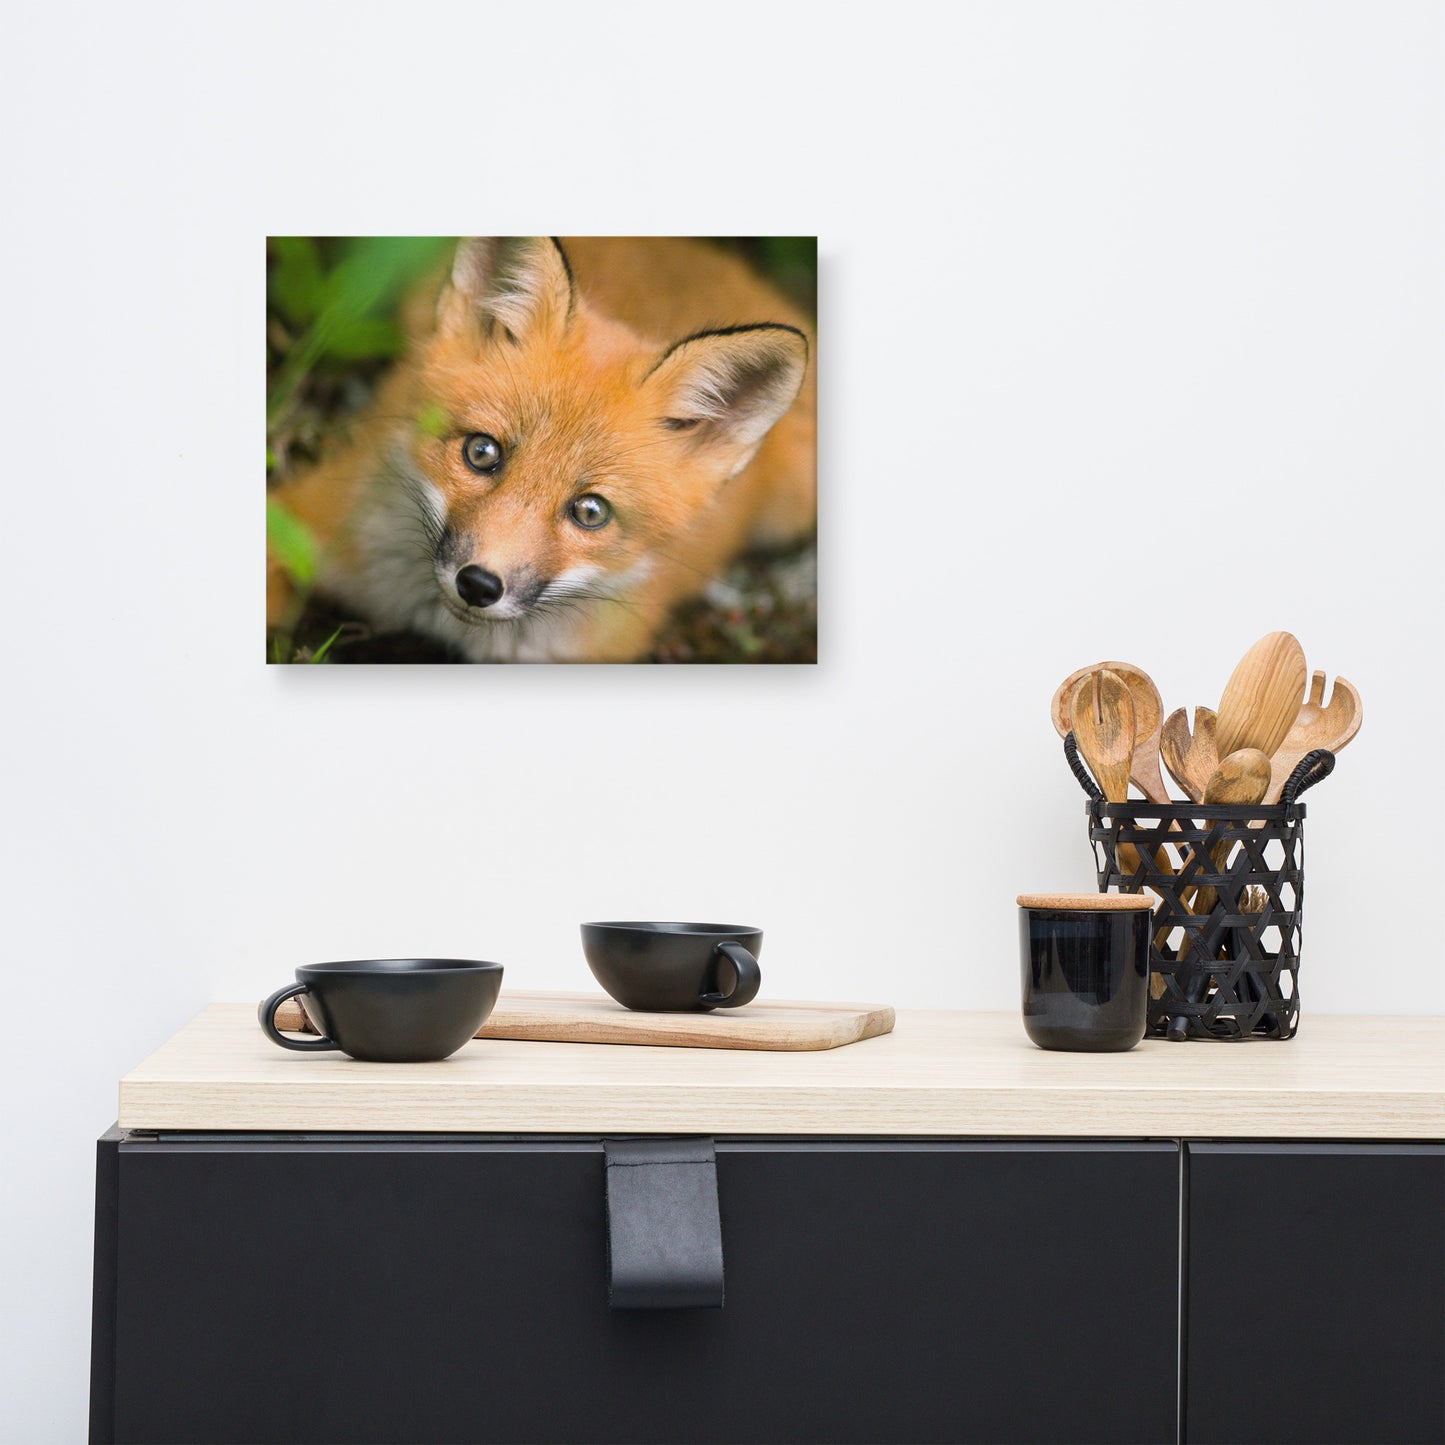 Young Red Fox Face Animal Wildlife Nature Photograph Canvas Wall Art Prints